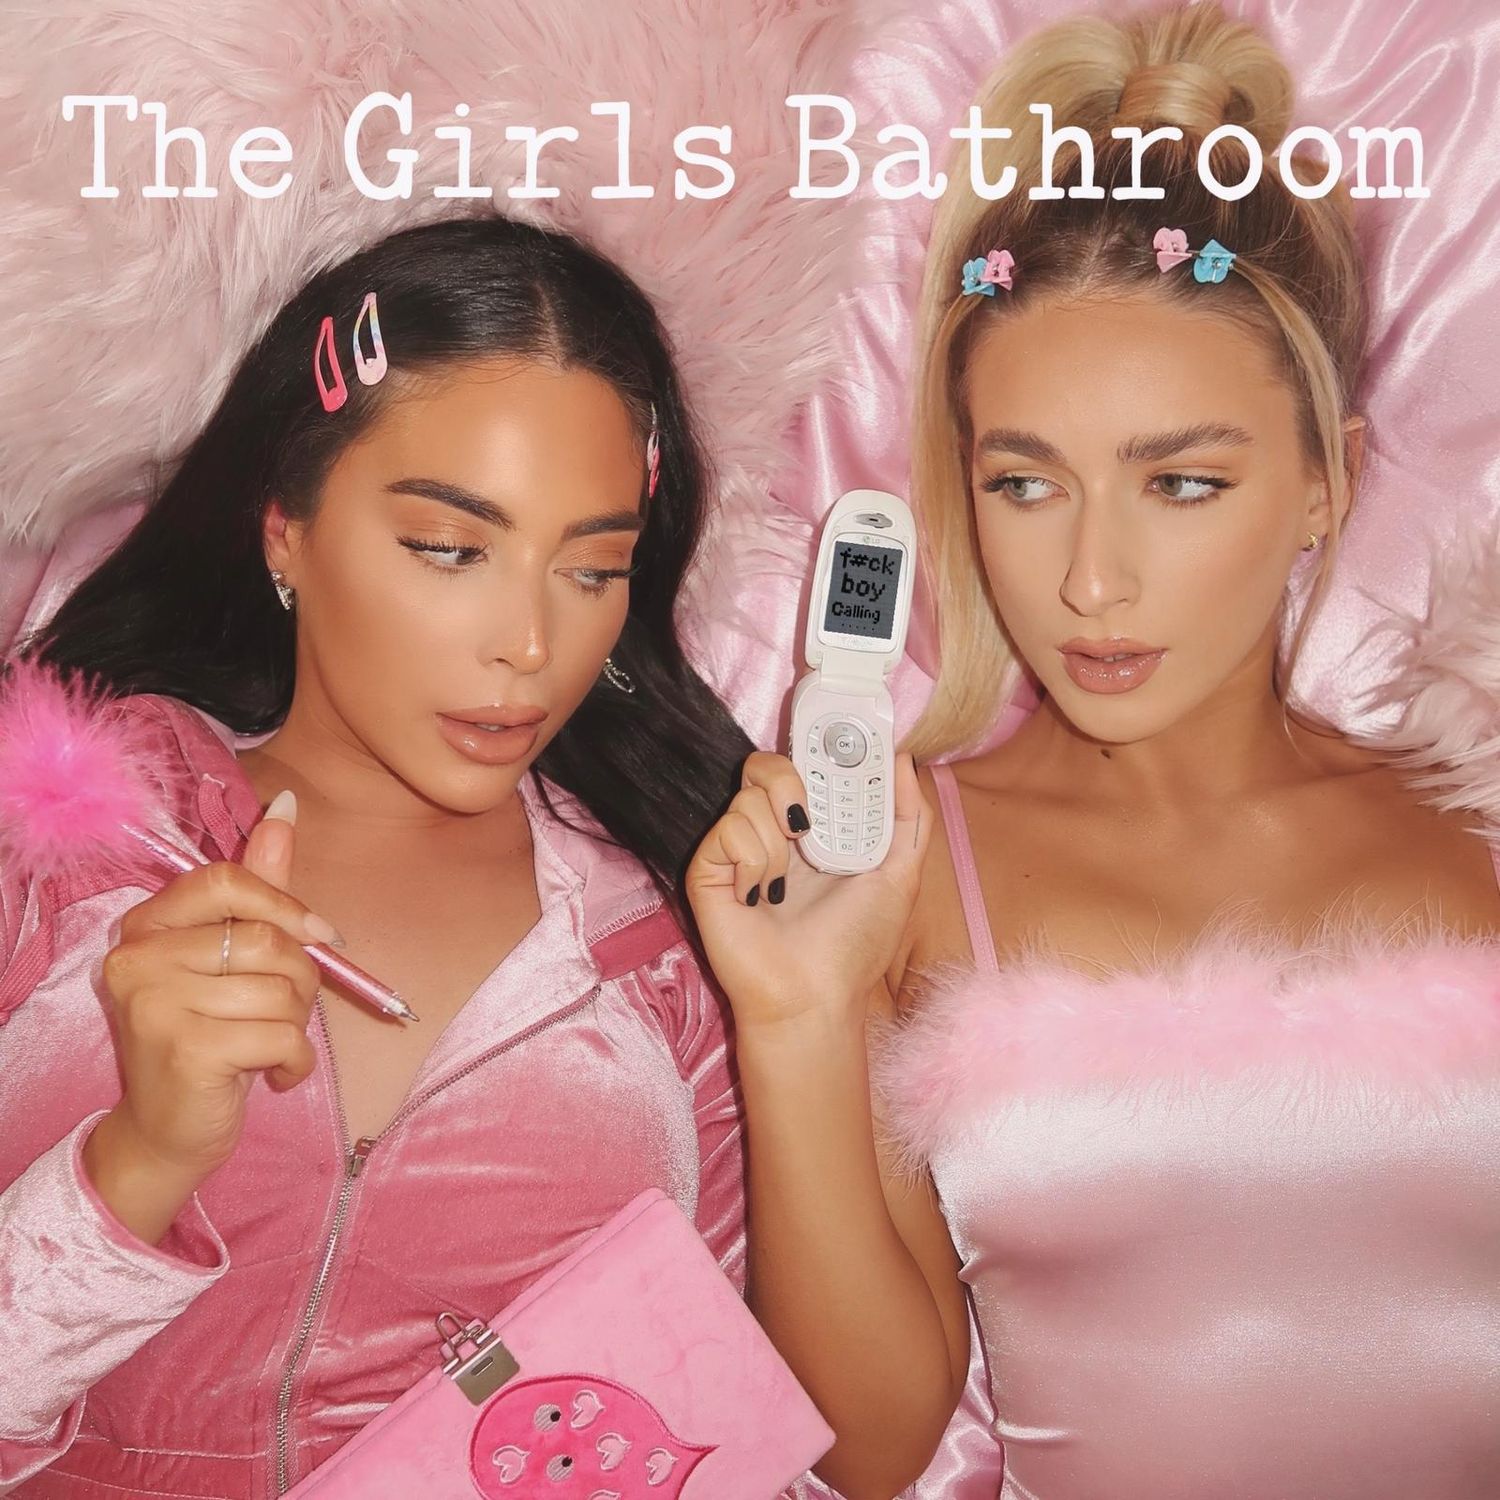 The Girls Bathroom Planet Tour at O2 City Hall Newcastle Tickets